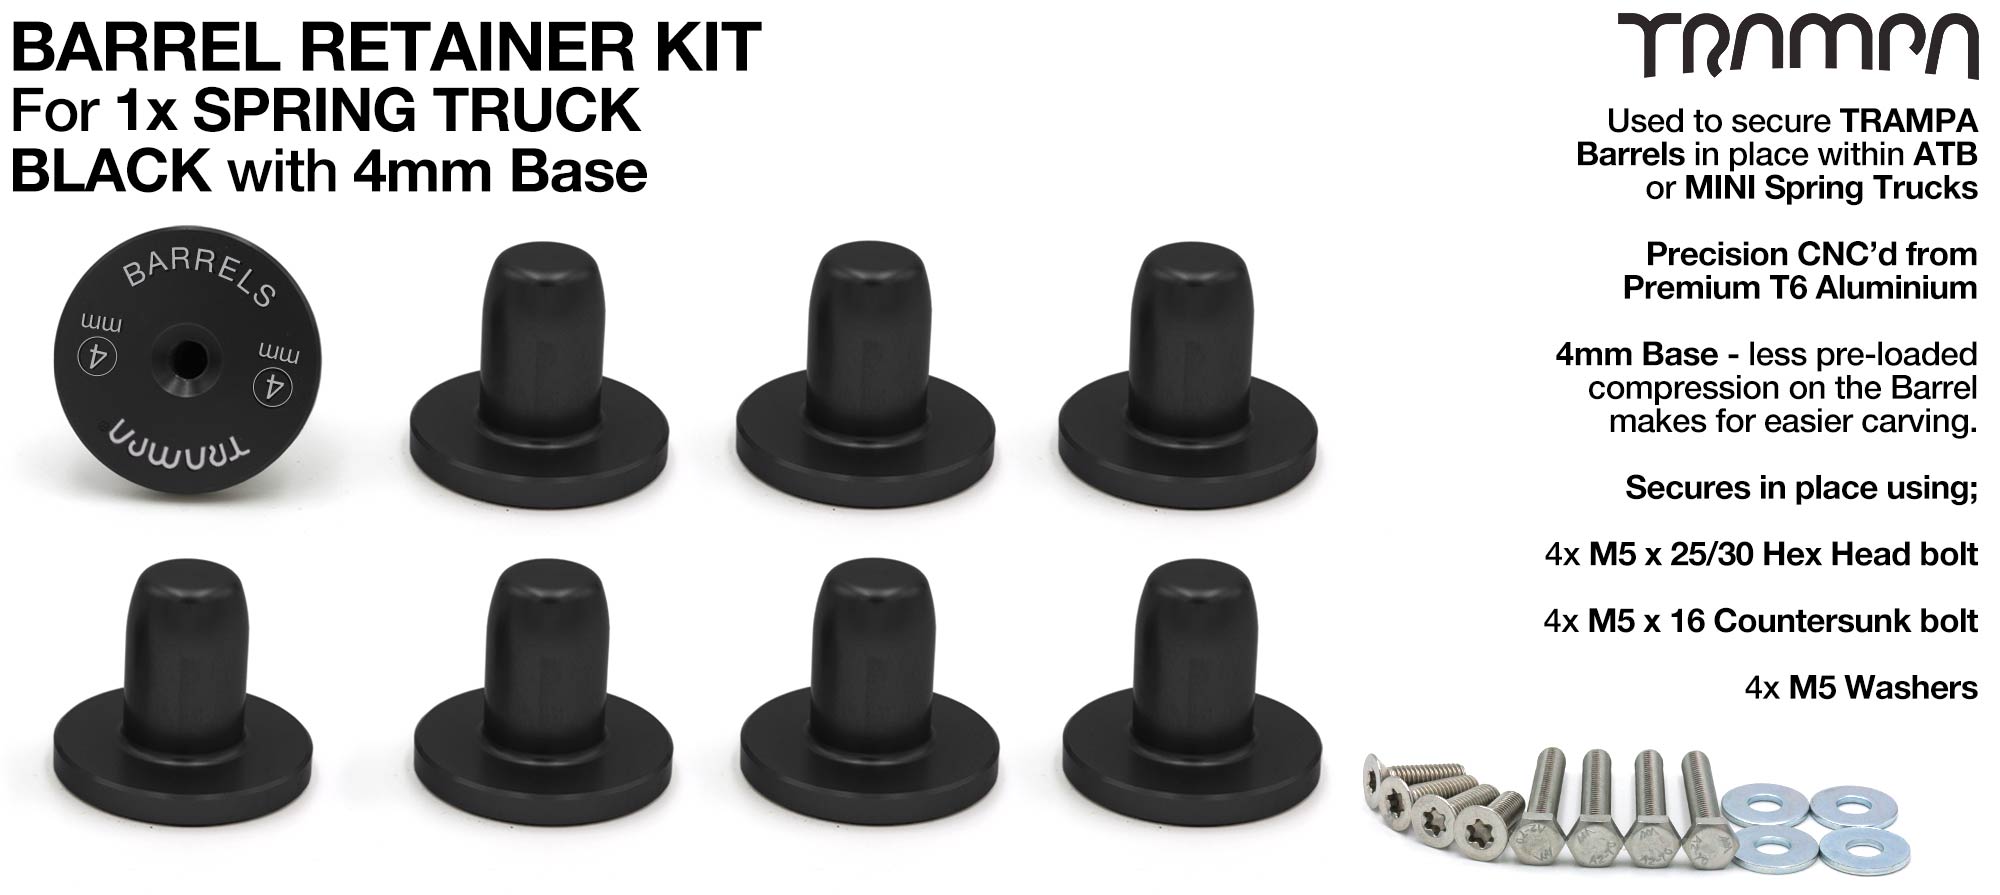 BLACK Barrel RETAINERS x8 with 4mm Base